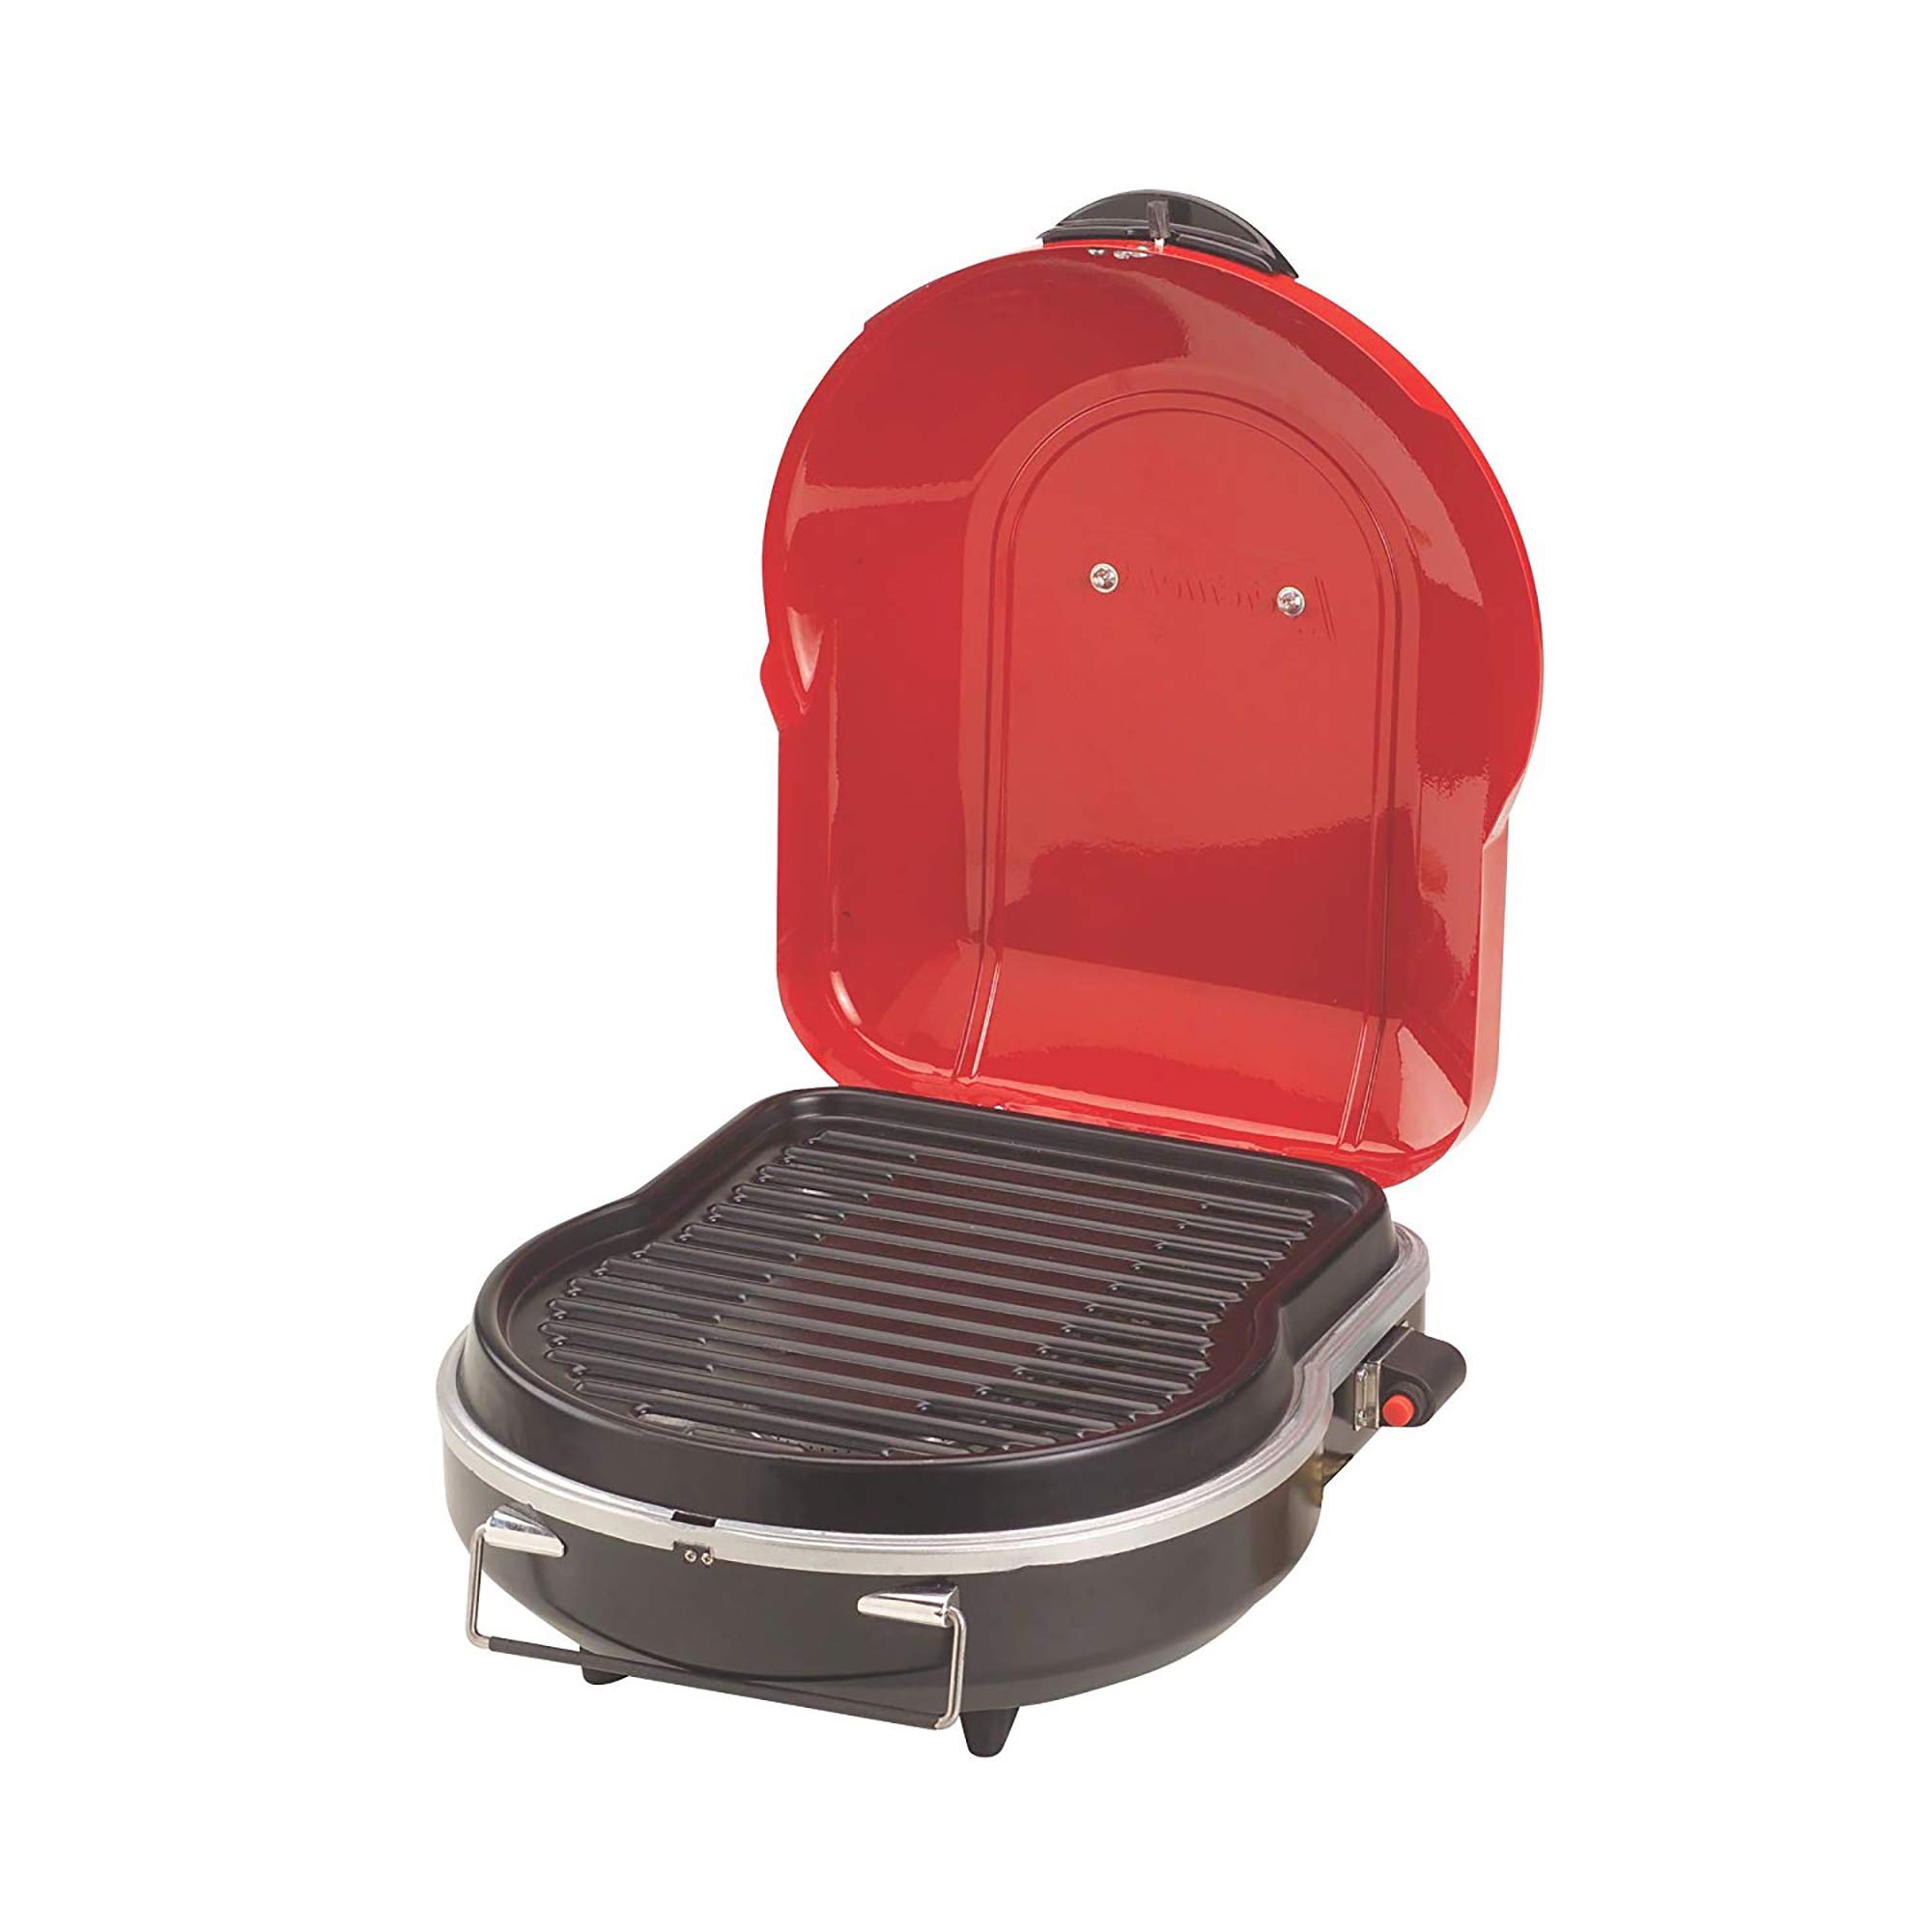 Coleman Fold N Go 1-Burner Propane Grill, Lightweight & Portable Grill with Instastart Push-Button Ignition, Adjustable Horseshoe Burner, Built-In Handle, & 6,000 BTUs of Power